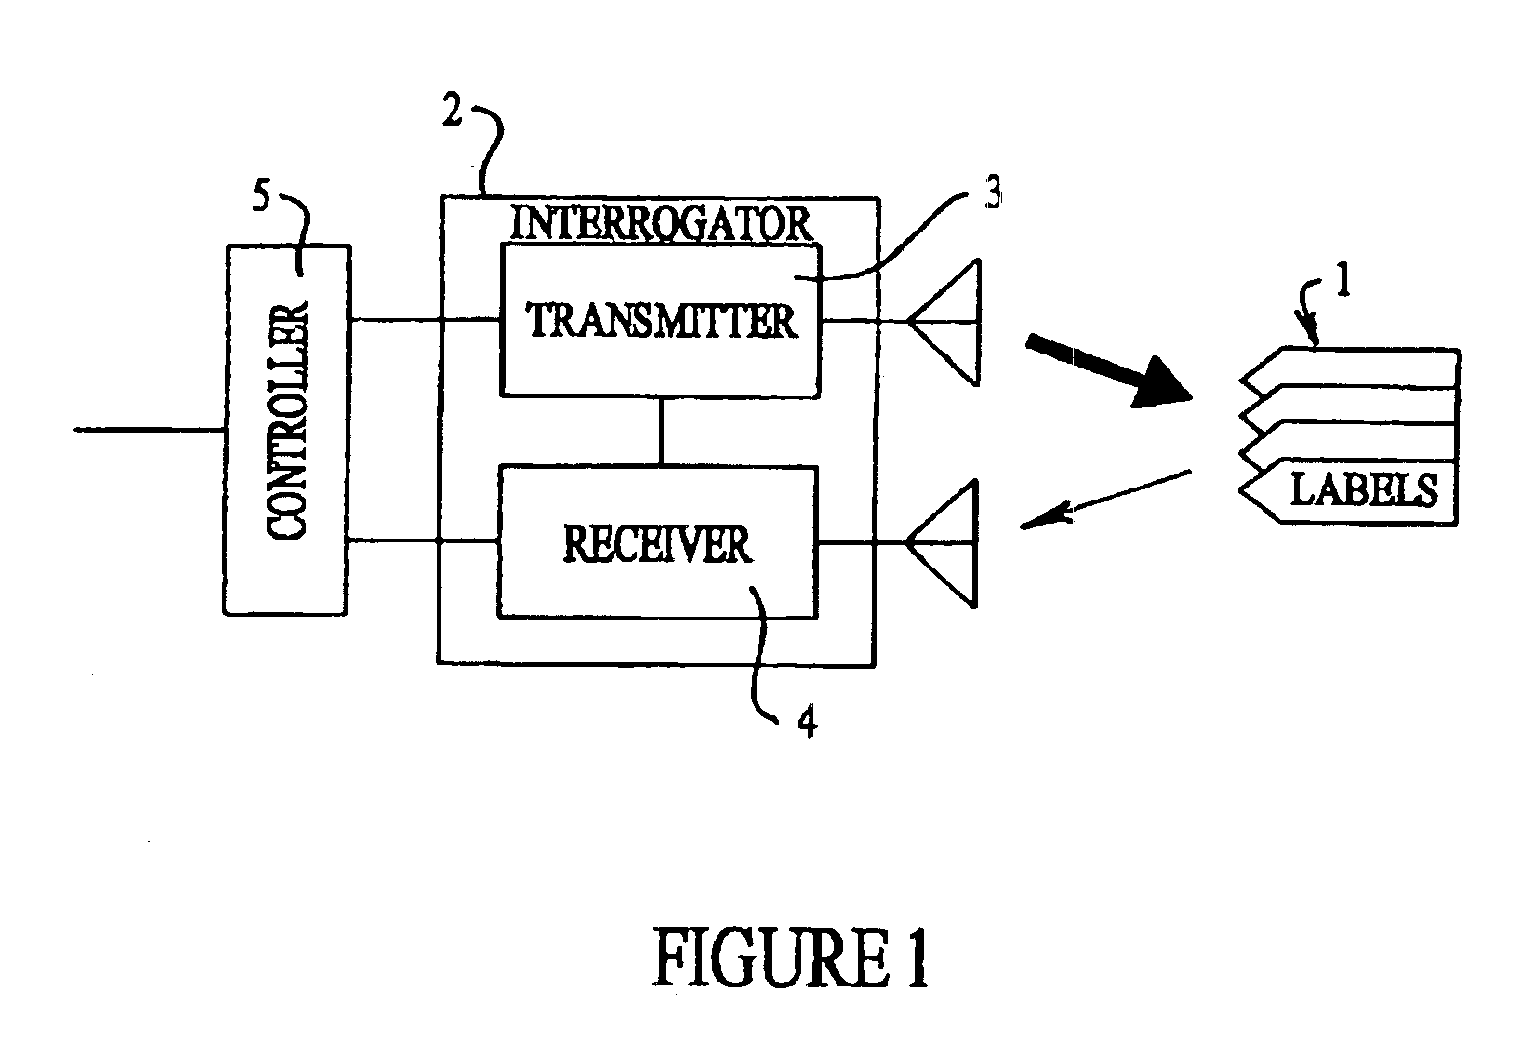 System and method for interrogating electronic labels